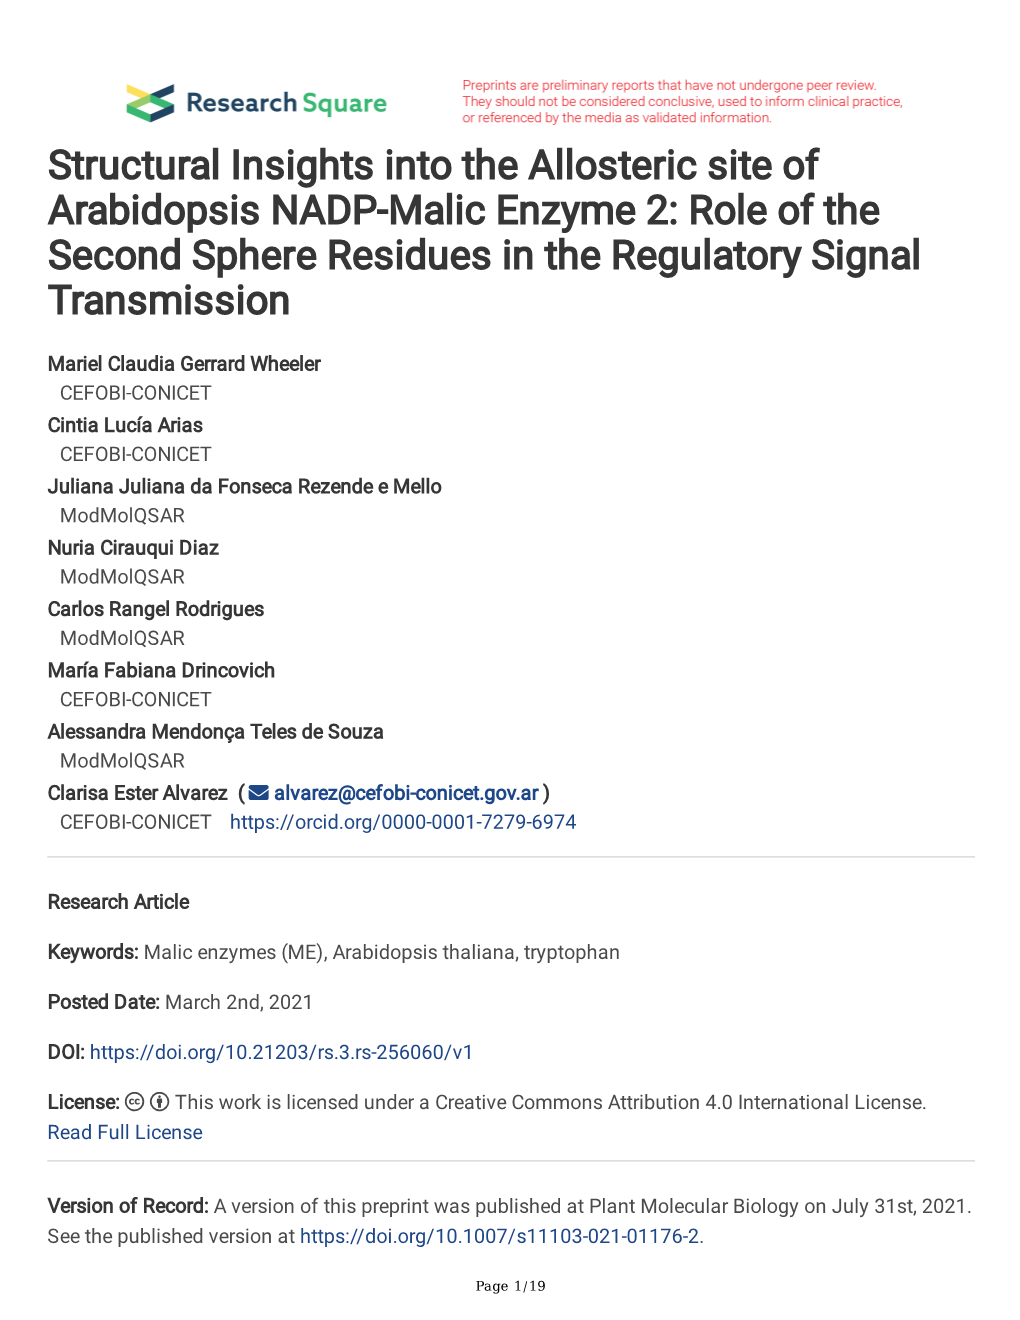 Structural Insights Into the Allosteric Site of Arabidopsis NADP-Malic Enzyme 2: Role of the Second Sphere Residues in the Regulatory Signal Transmission